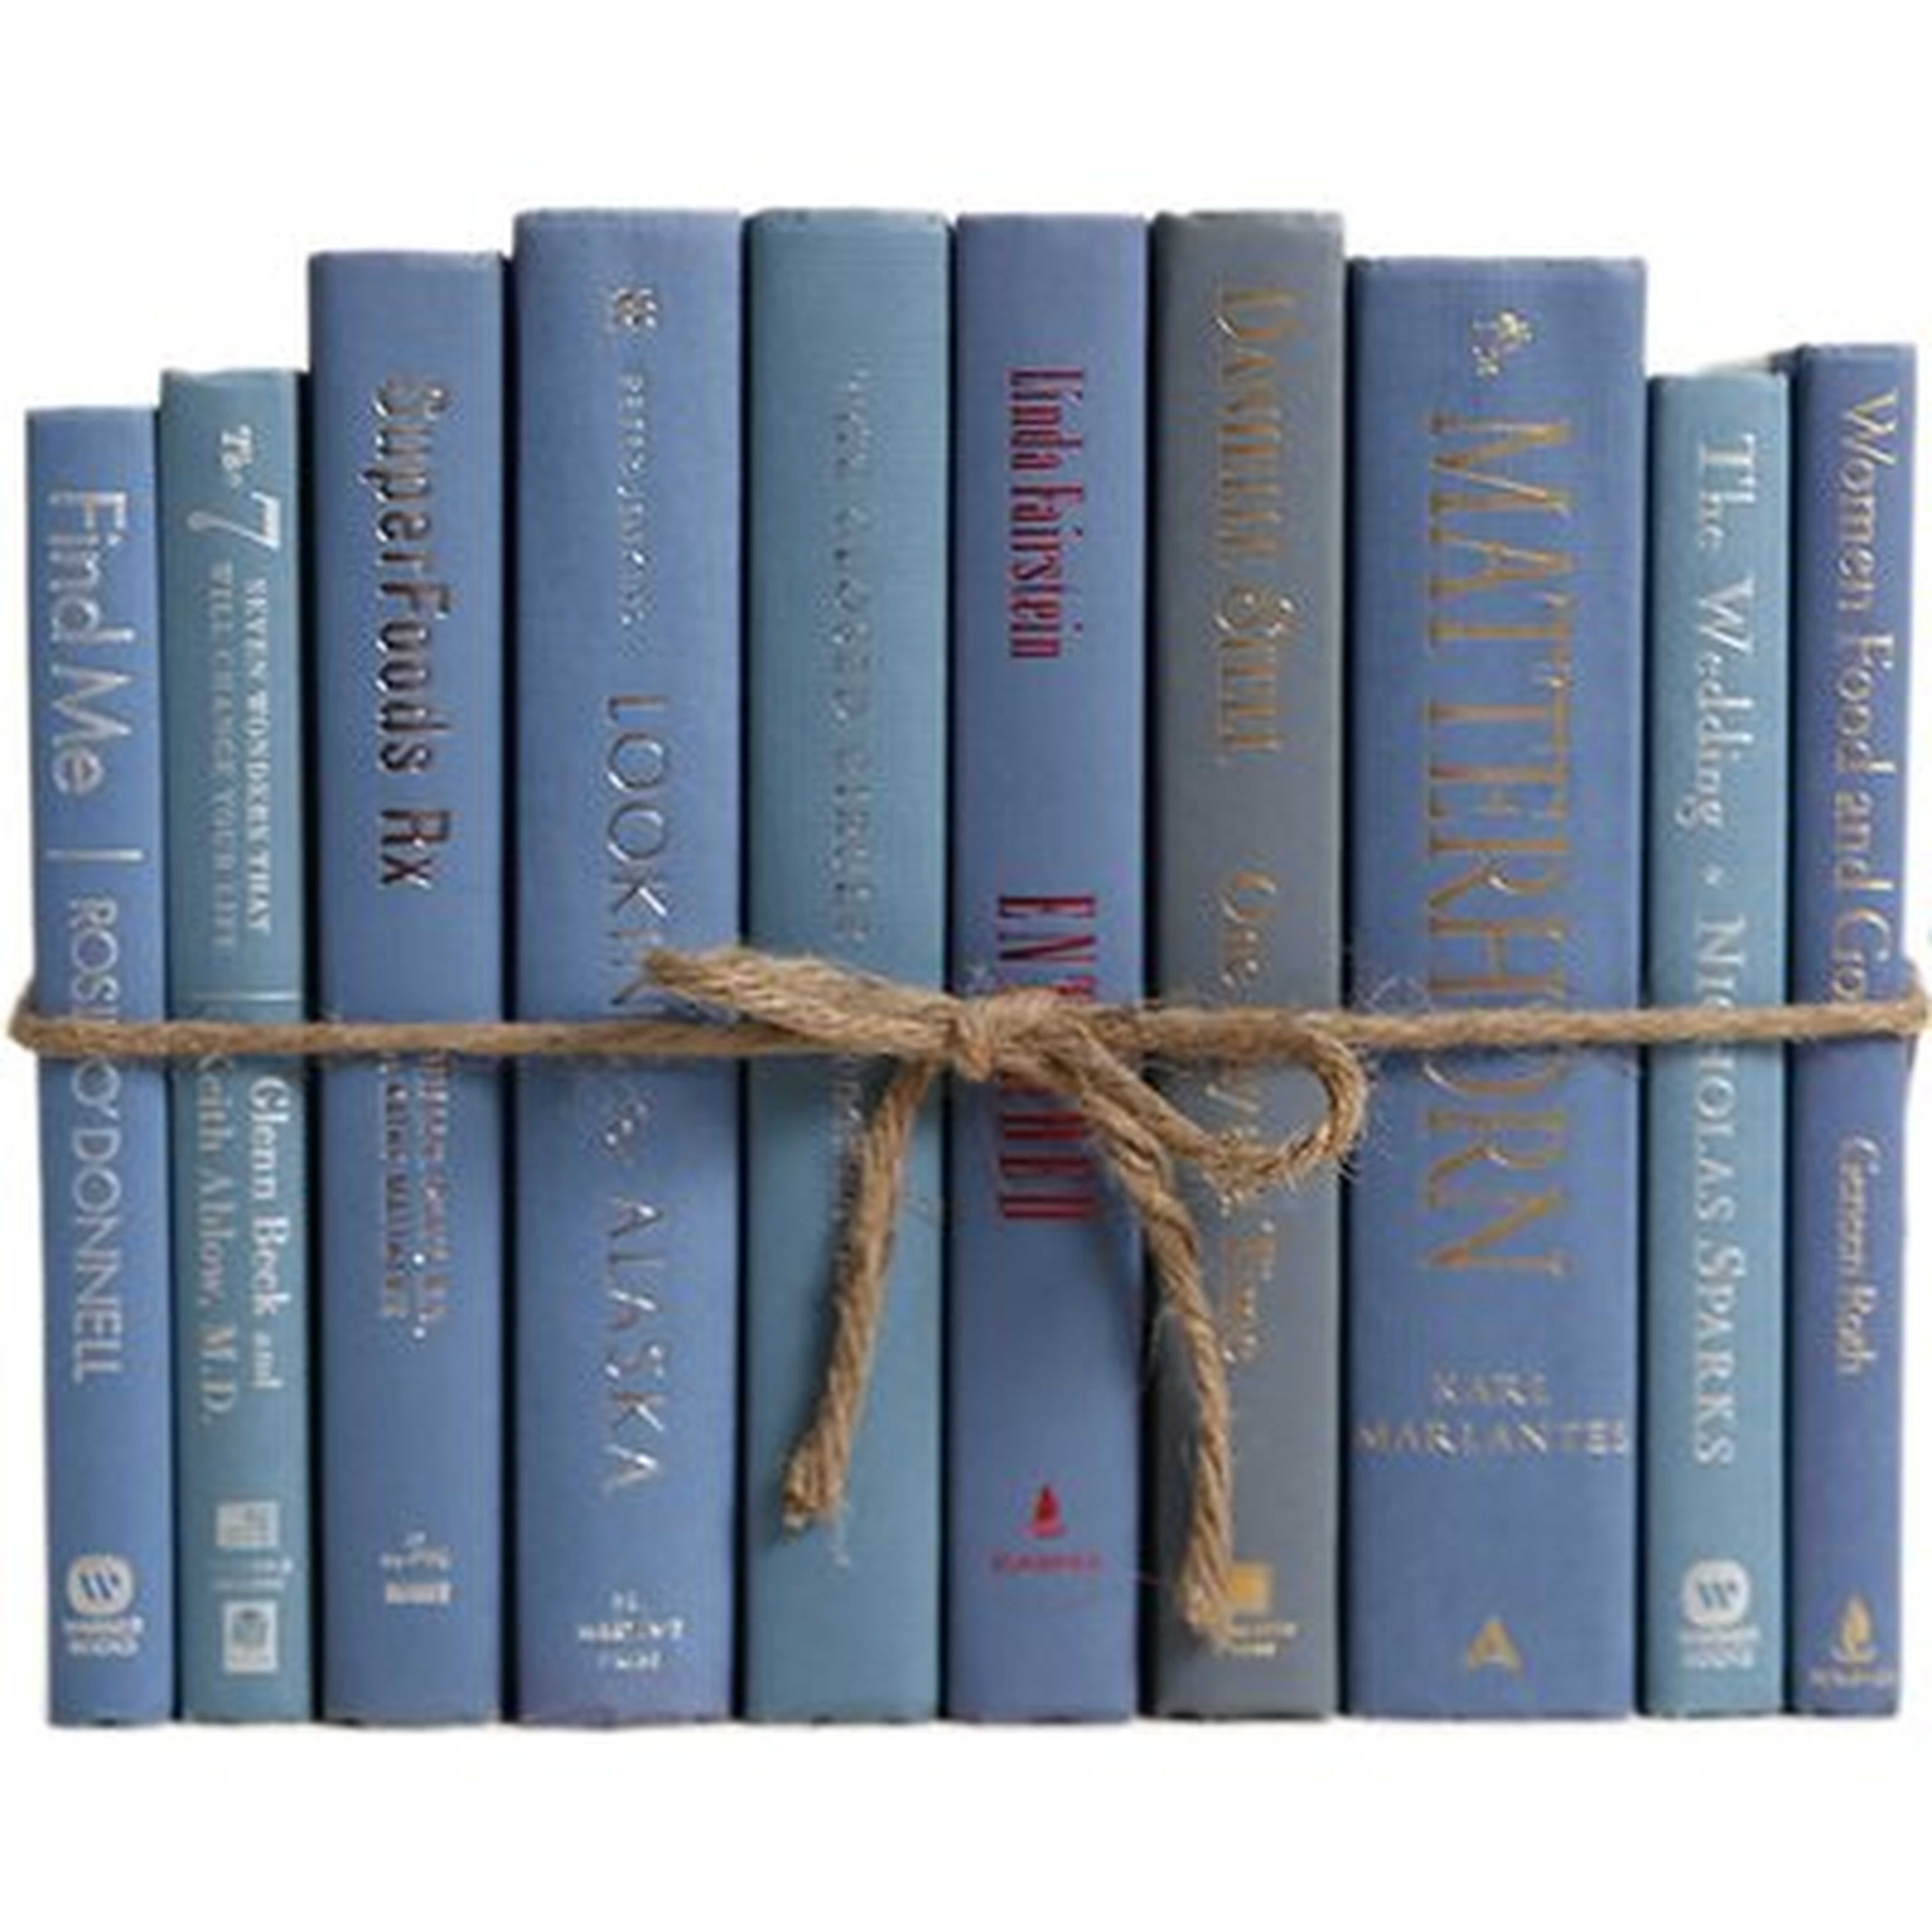 Authentic Decorative Books - By Color Modern Marlin ColorPak (1 Linear Foot, 10-12 Books) - Birch Lane